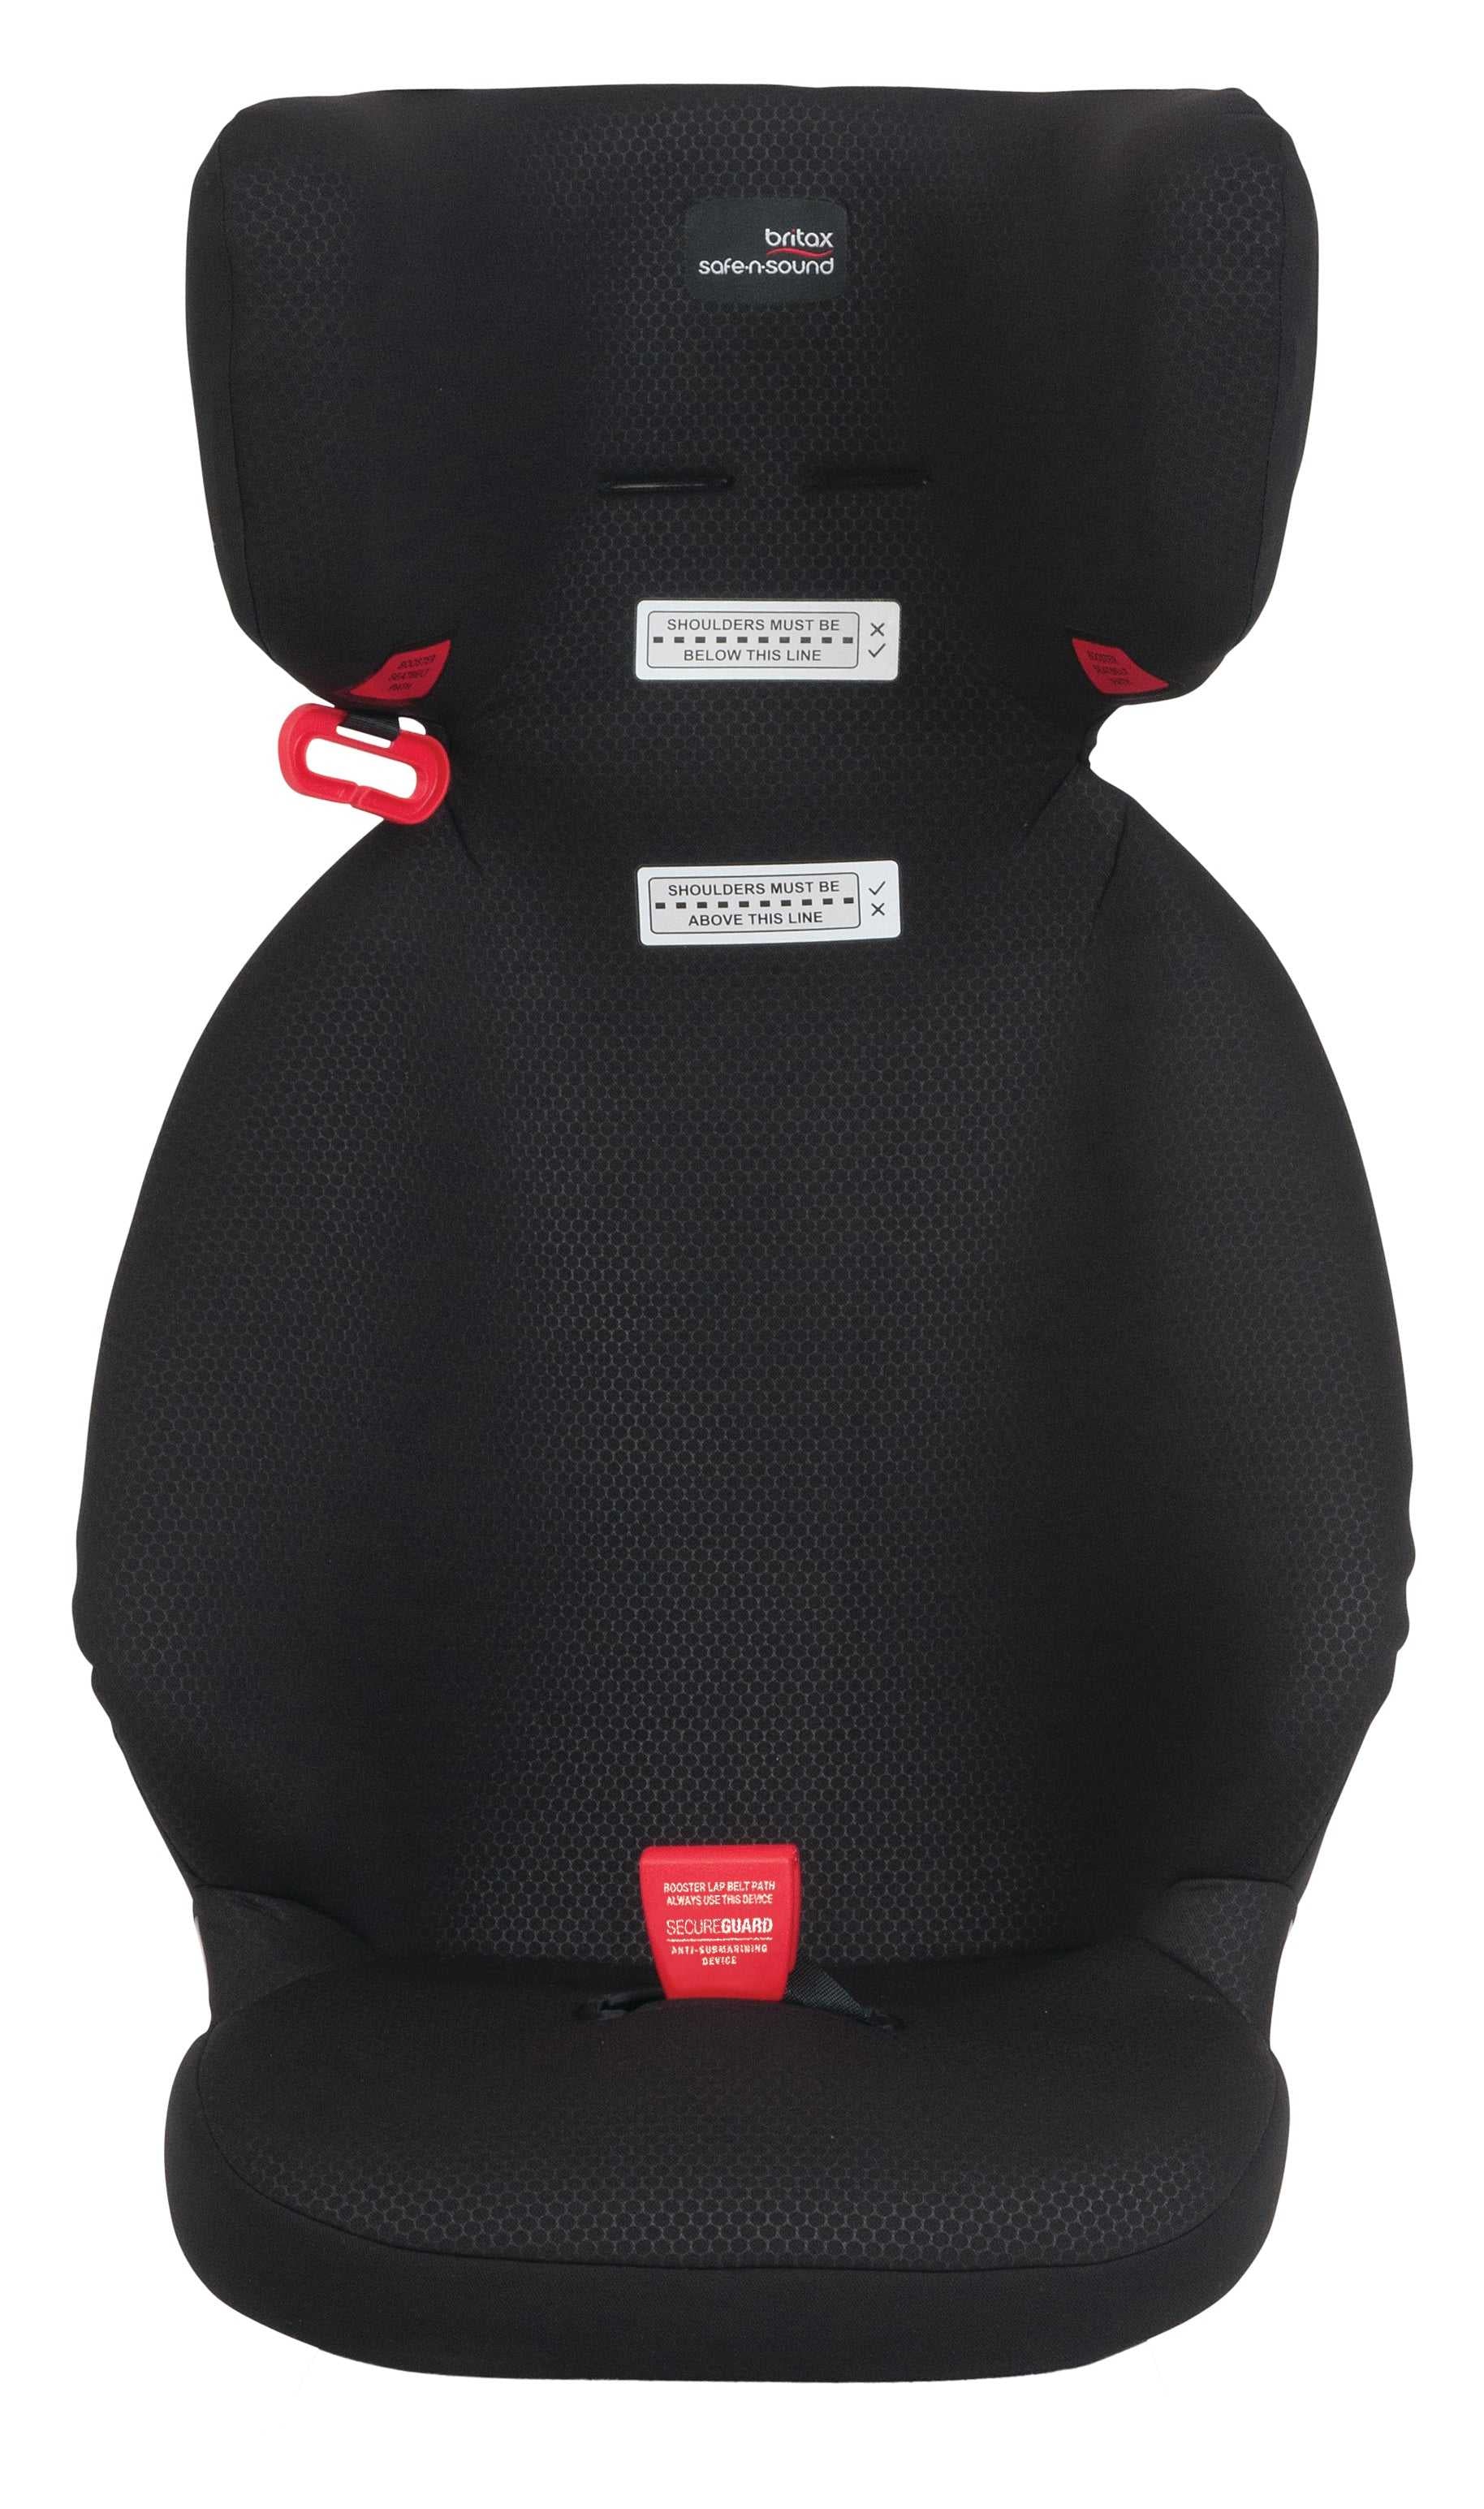 Britax Safe n Sound Tourer Booster Seat BLACK - Tiny Tots Baby Store 